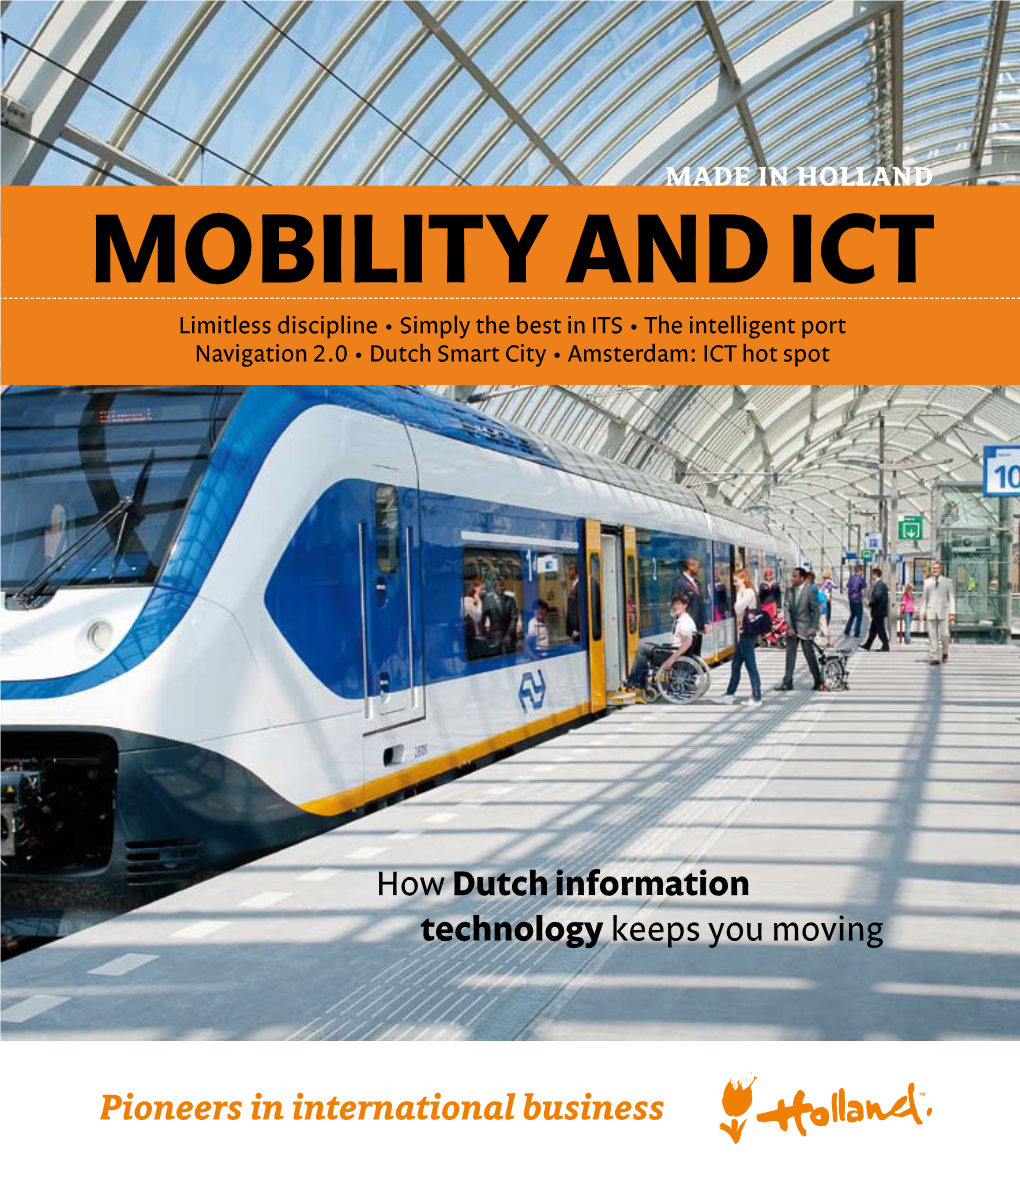 Mobility and ICT Limitless Discipline • Simply the Best in ITS • the Intelligent Port Navigation 2.0 • Dutch Smart City • Amsterdam: ICT Hot Spot